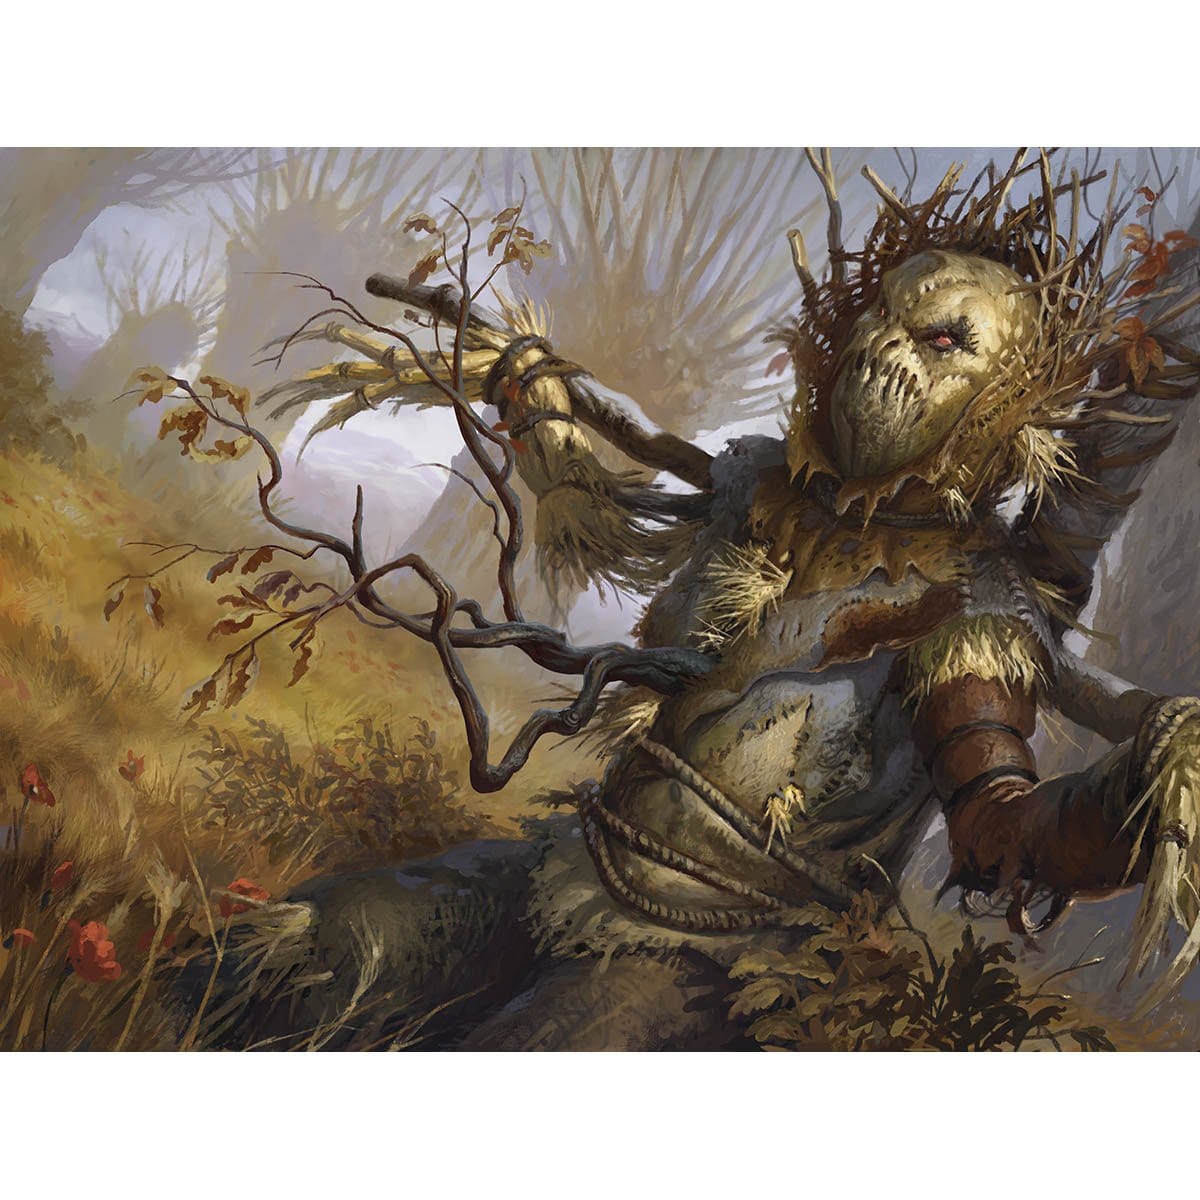 Wild-Field Scarecrow Print - Print - Original Magic Art - Accessories for Magic the Gathering and other card games